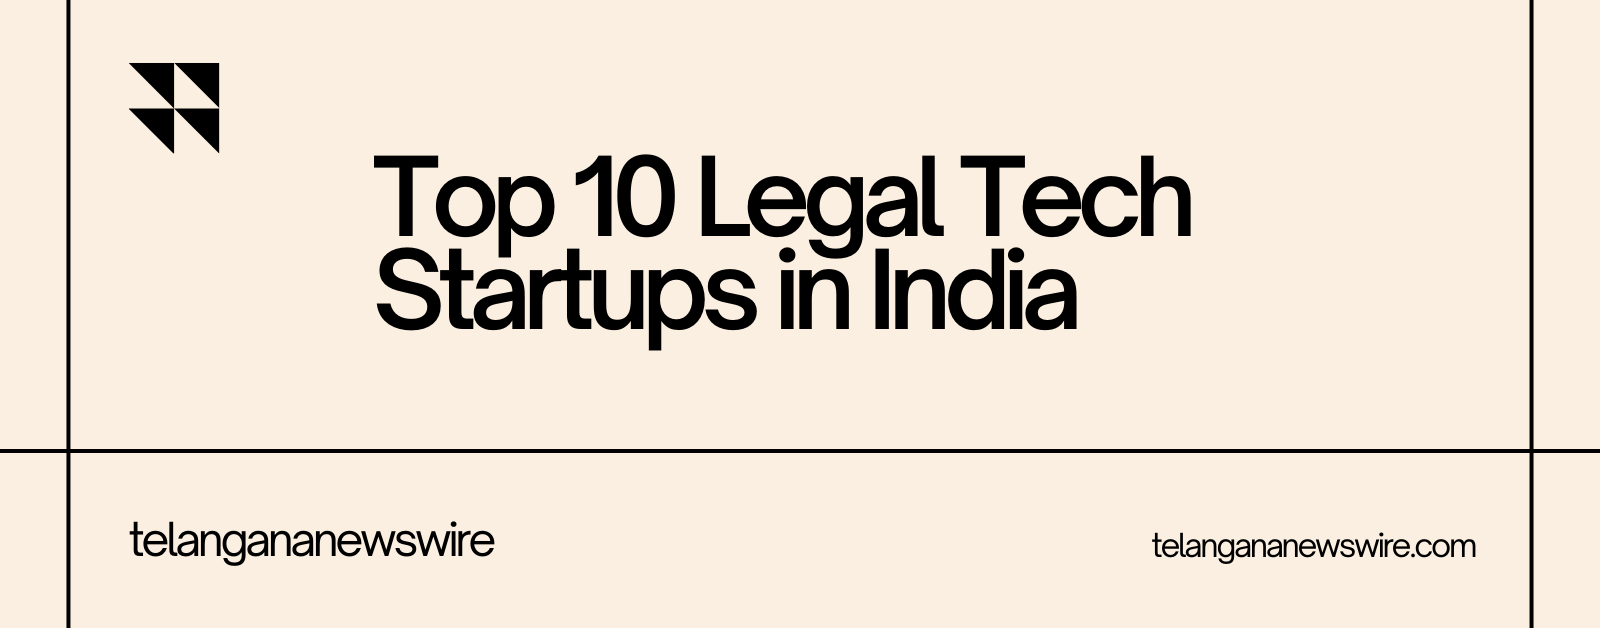 Top 10 Legal Tech Startups in India